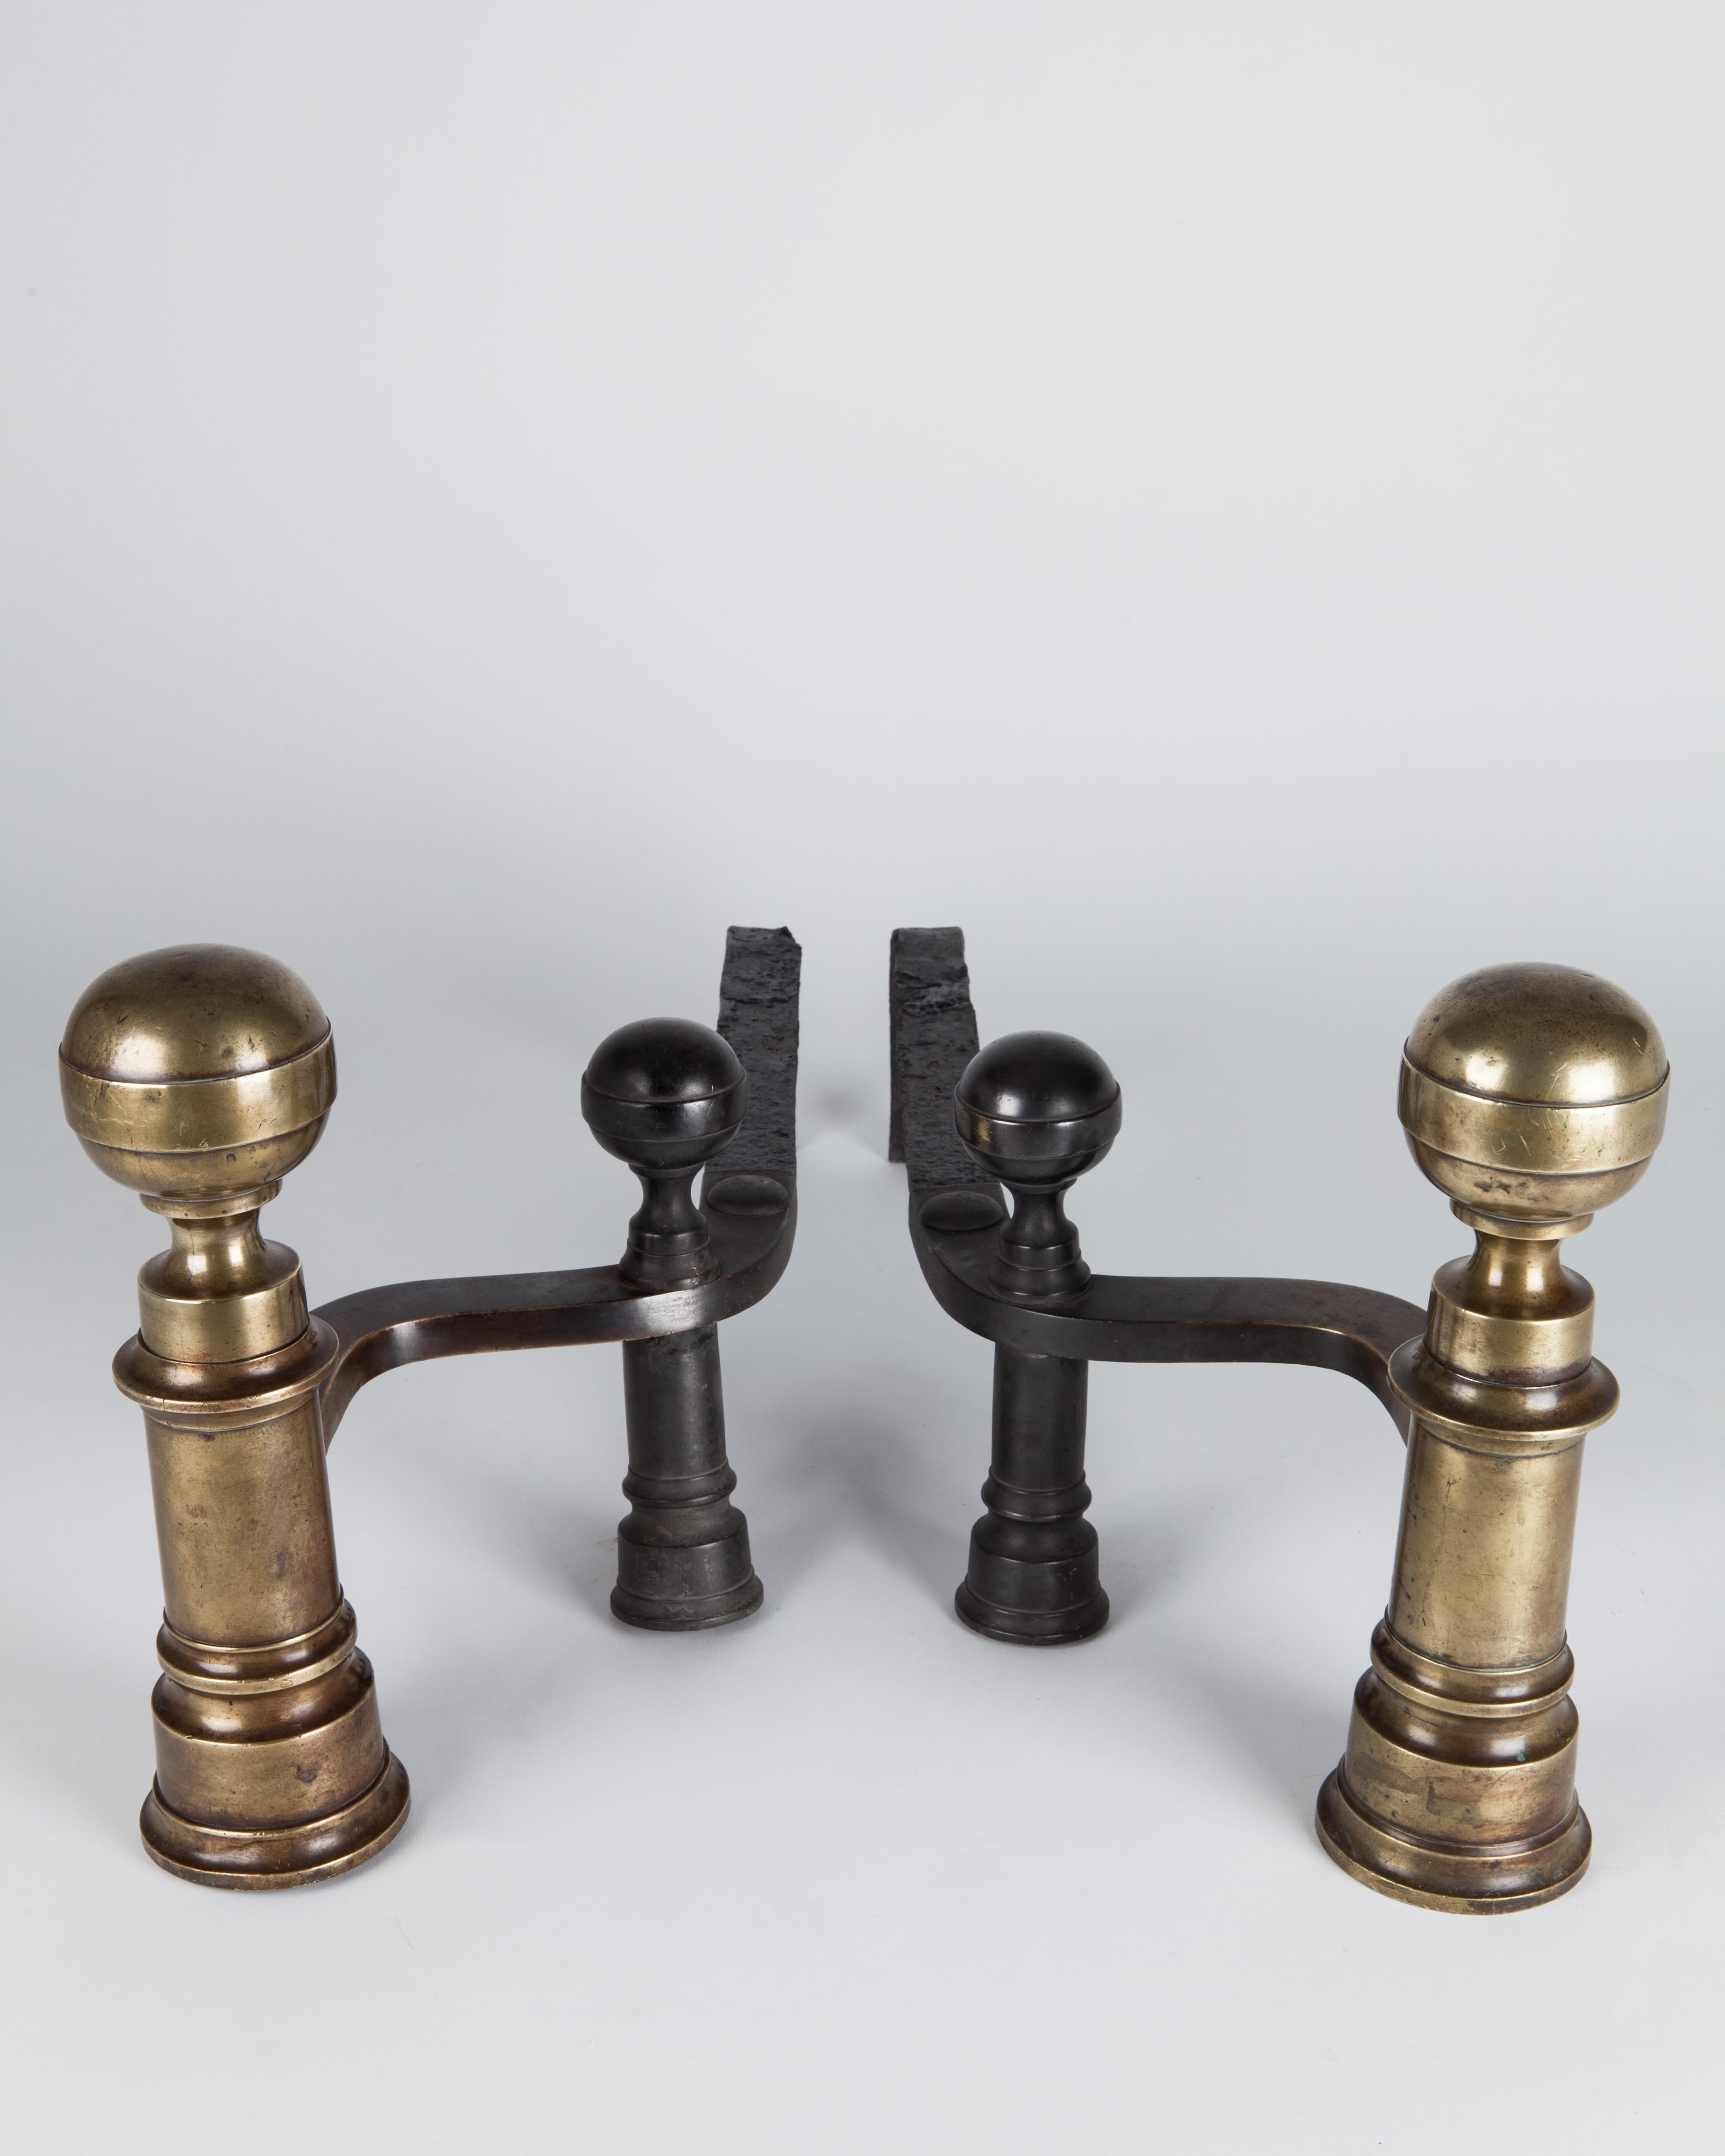 Federal Antique Brass Hunneman Andirons with Tapered Bodies and Ball Finials, Circa 1880 For Sale